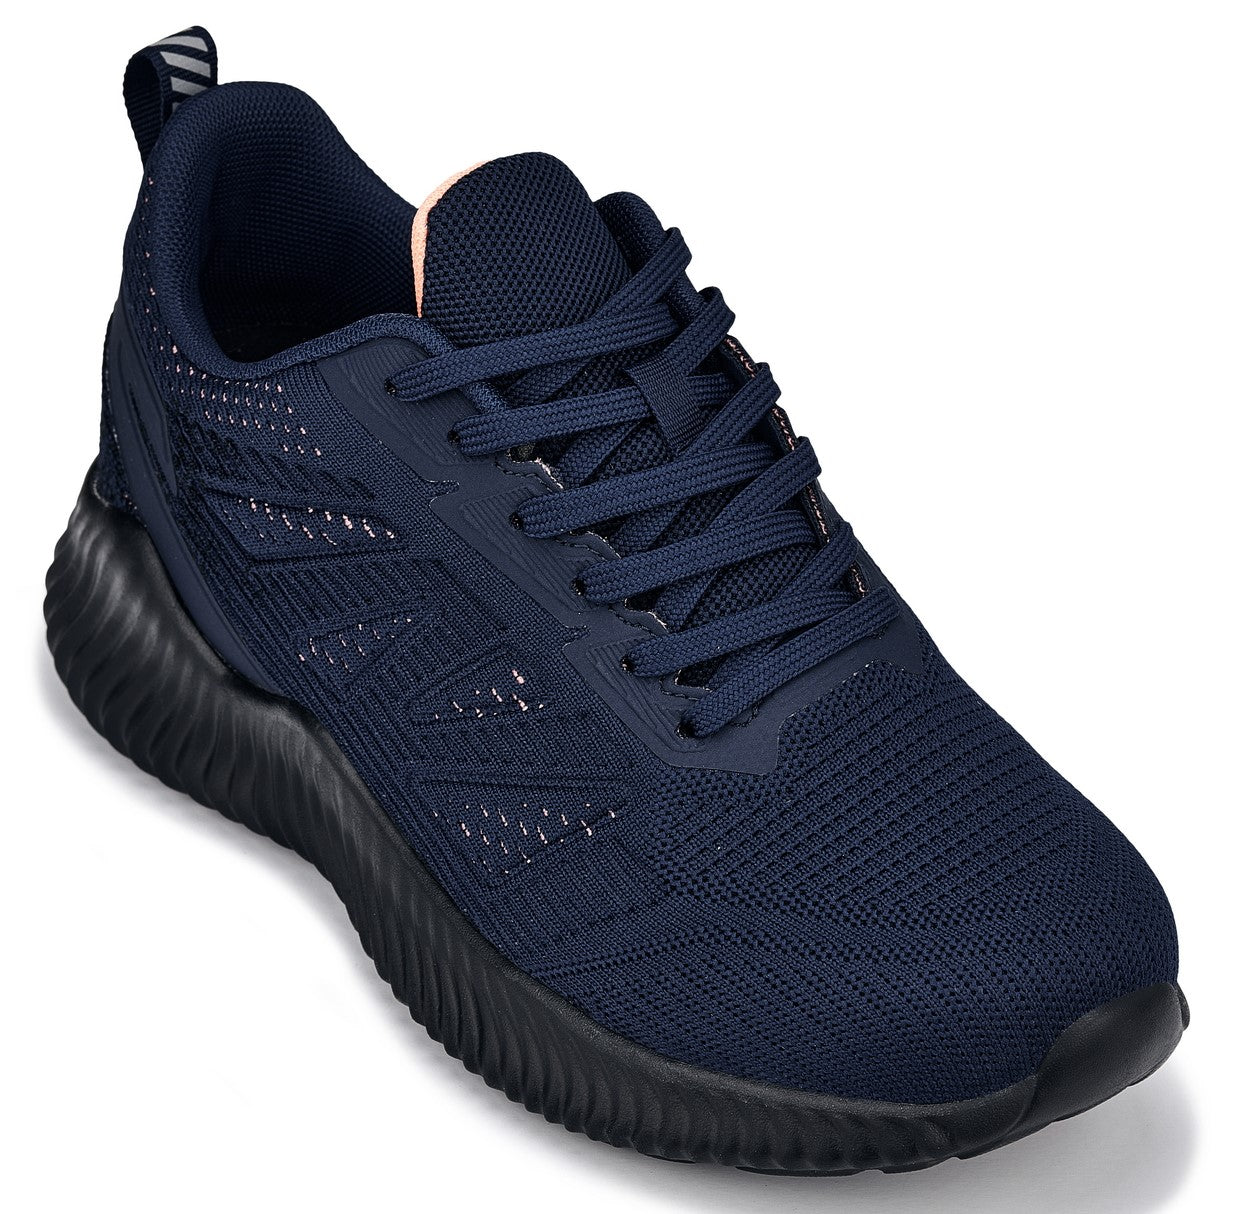 CALTO - Q222 - 2.6 Inches Taller (Navy/Coral) - Lightweight Sporty Sneakers